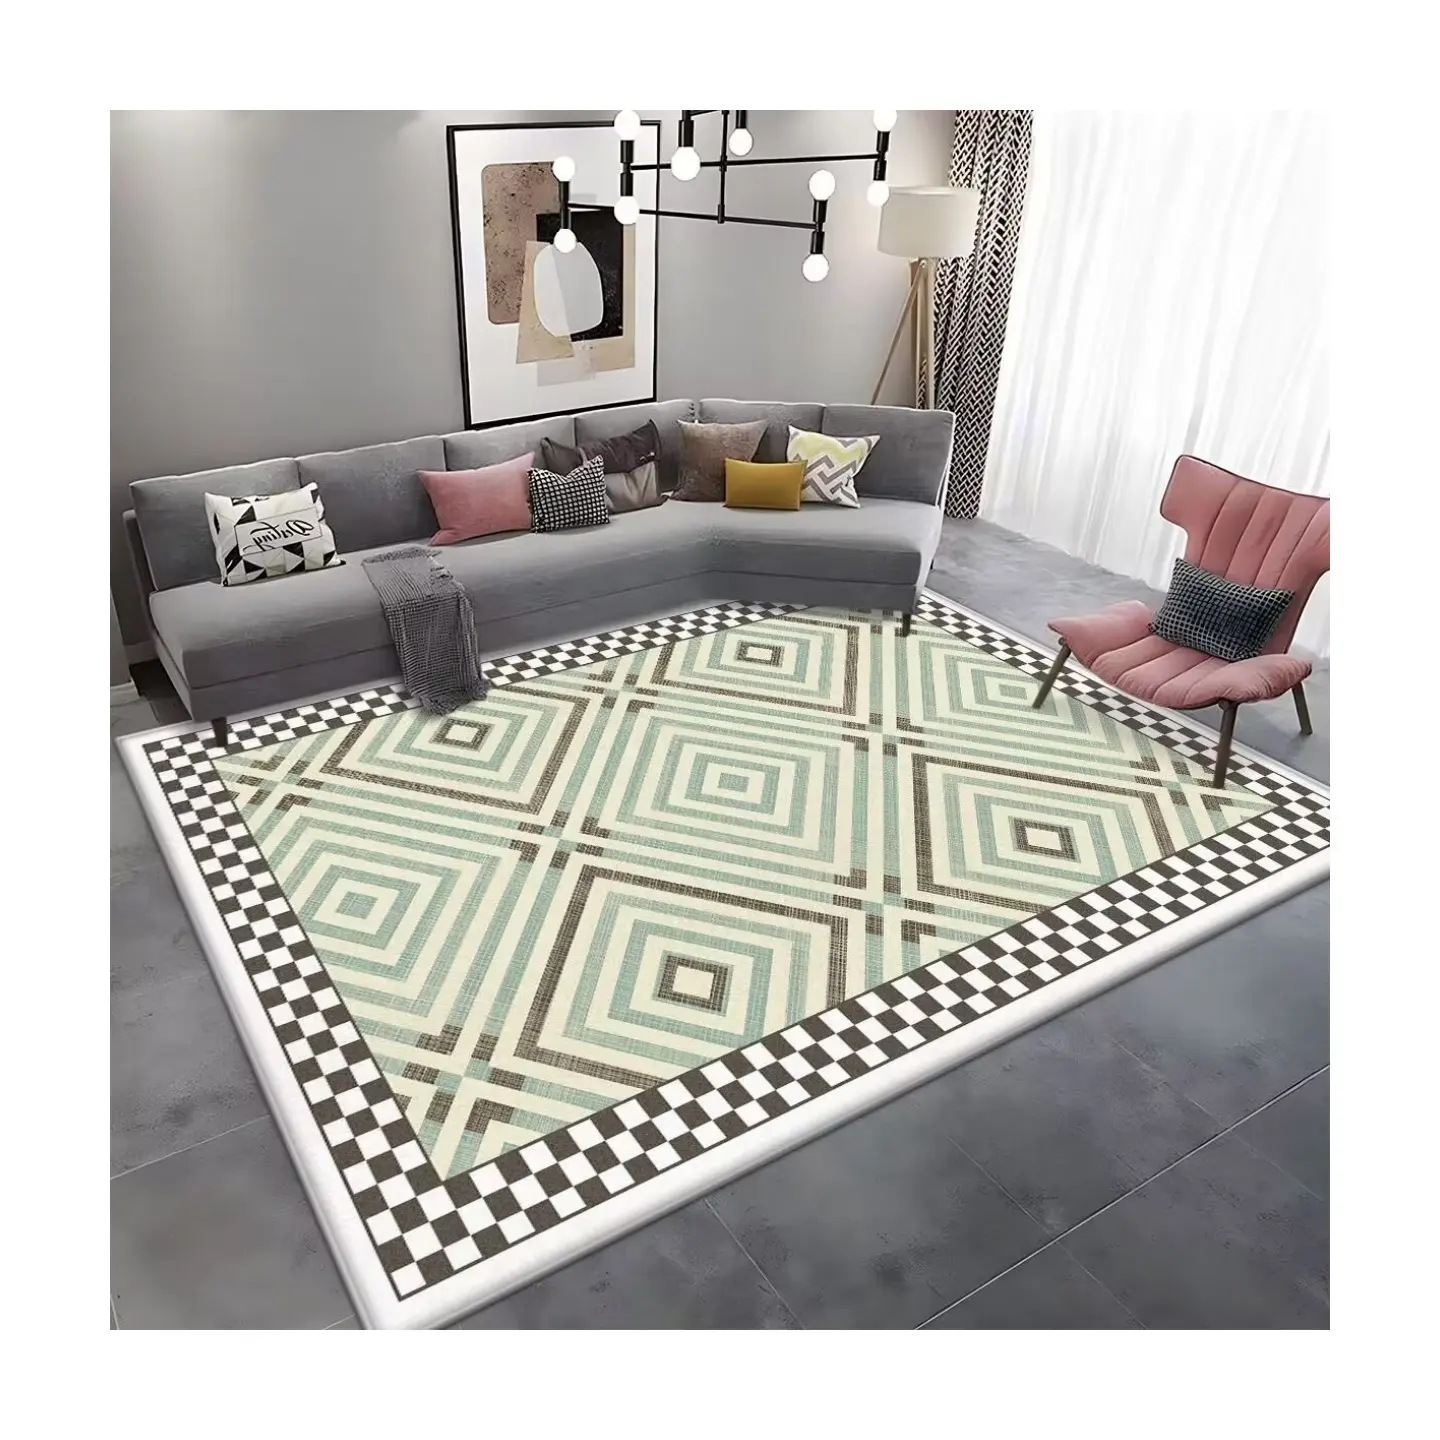 special anti slip area carpets for bedroom and living room decoration house carpets printed area rug pad machine washable rugs